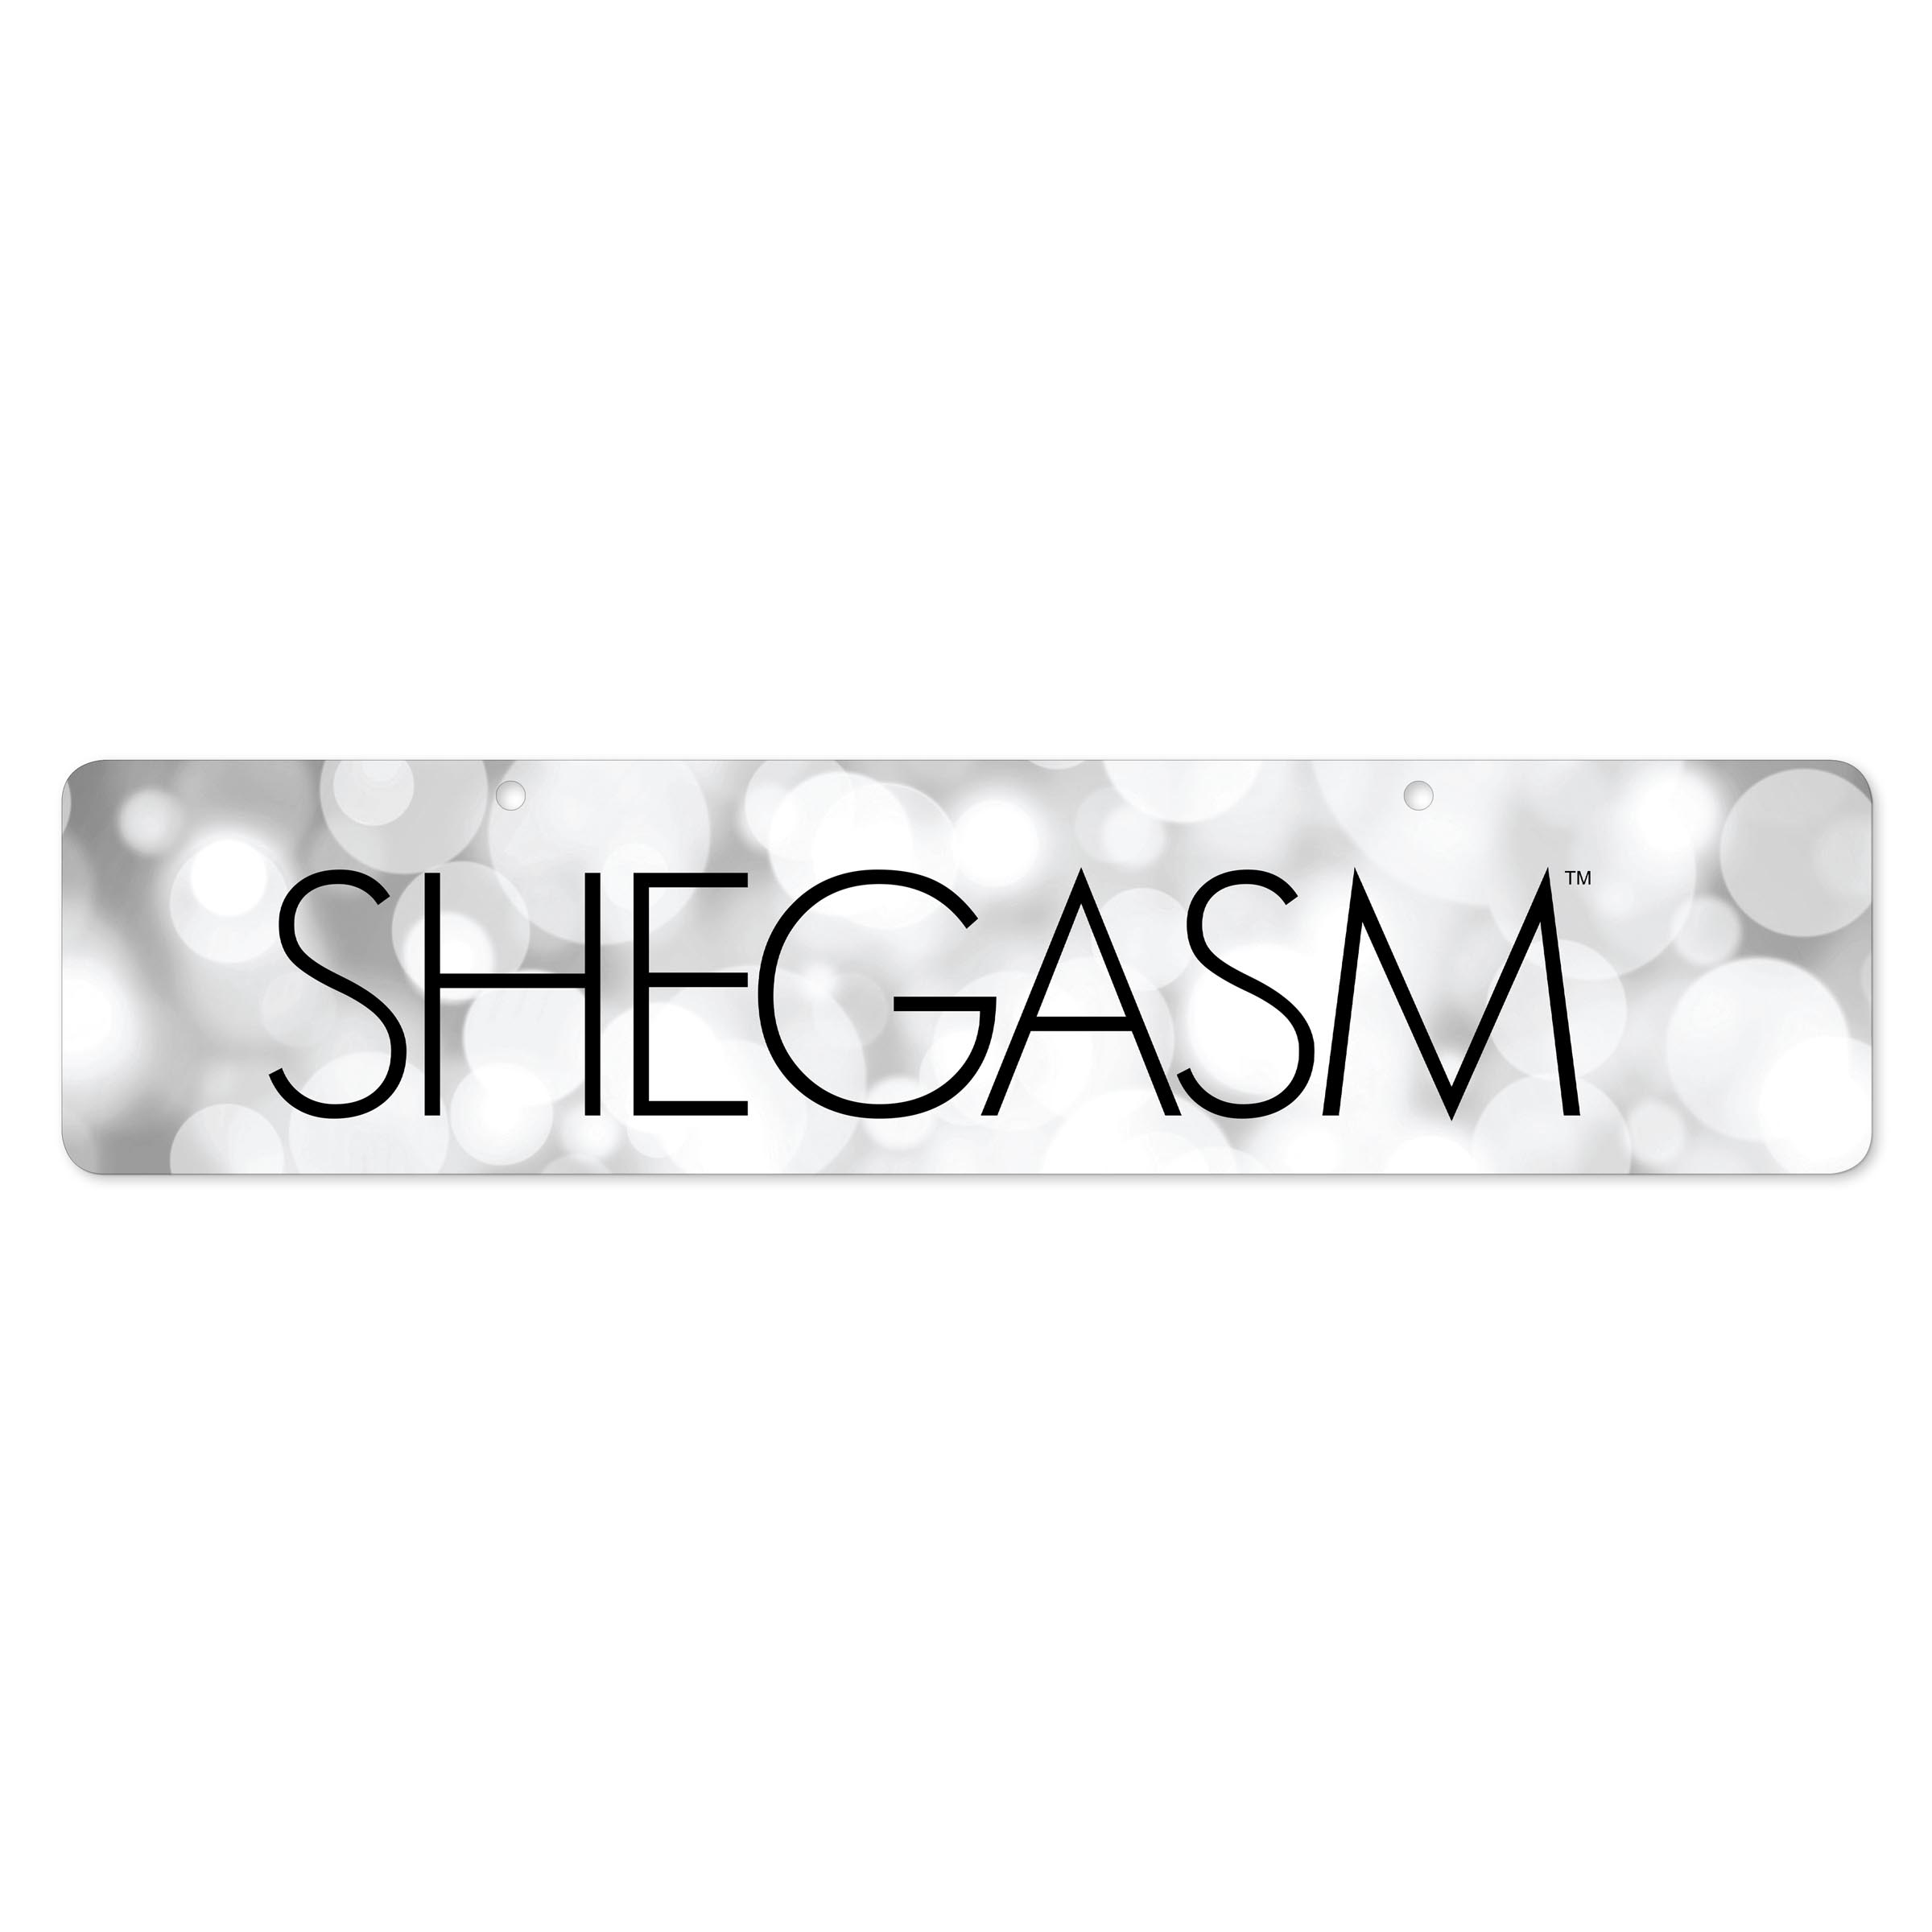 Cap off your Shegasm display with an attractive and functional planogram banner. Printed on heavy cardstock